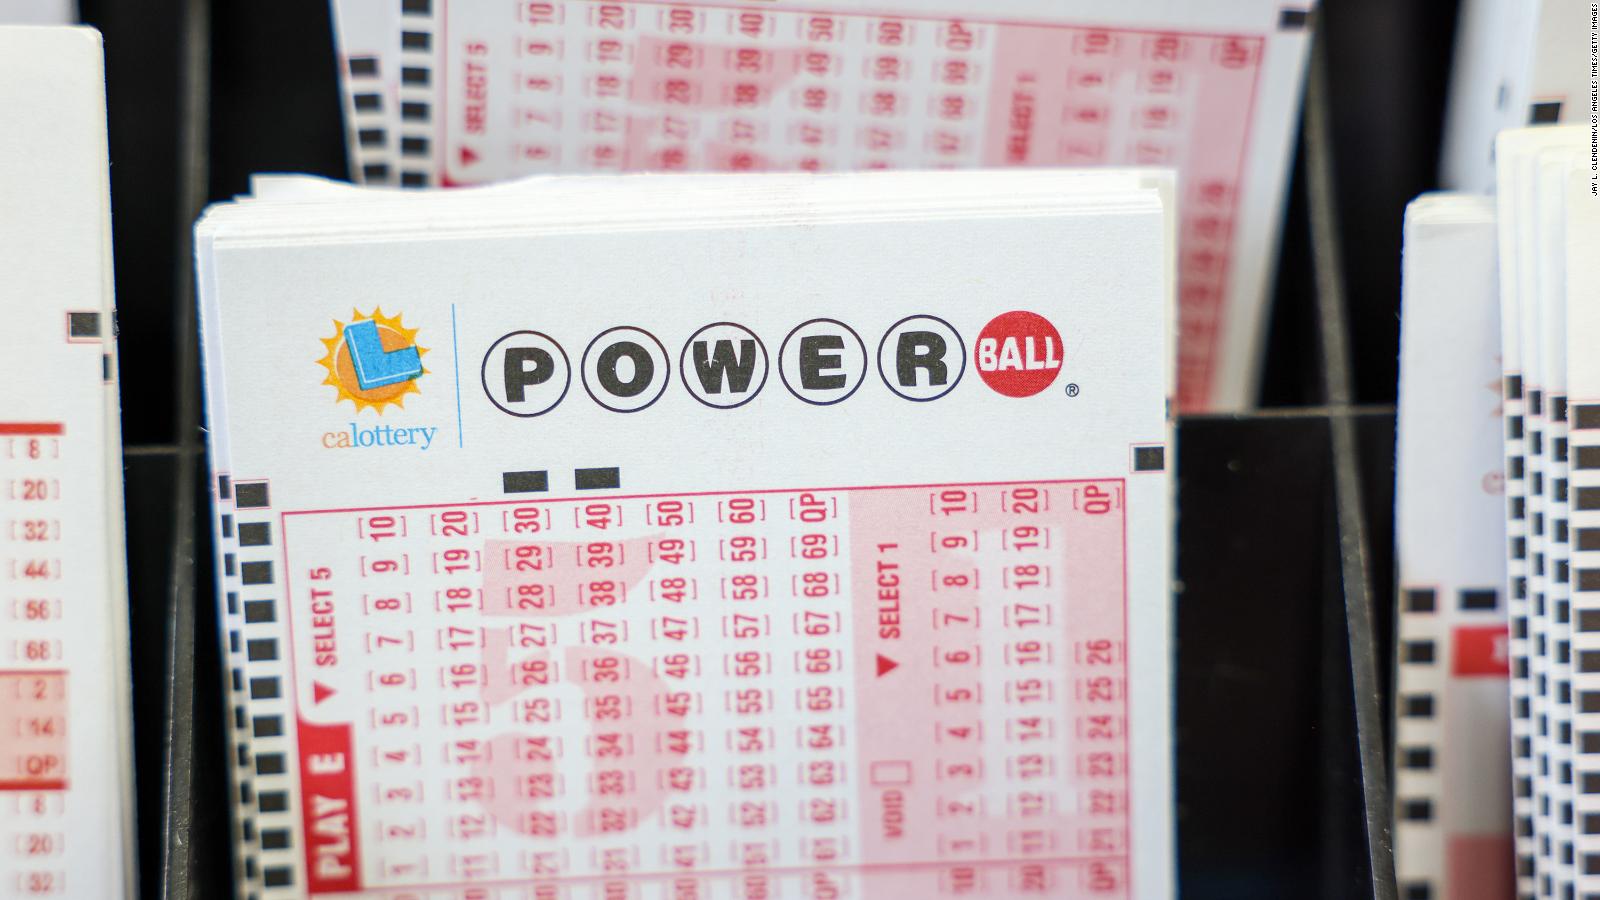 The Powerball drawing for Monday, April 1 has $975 million